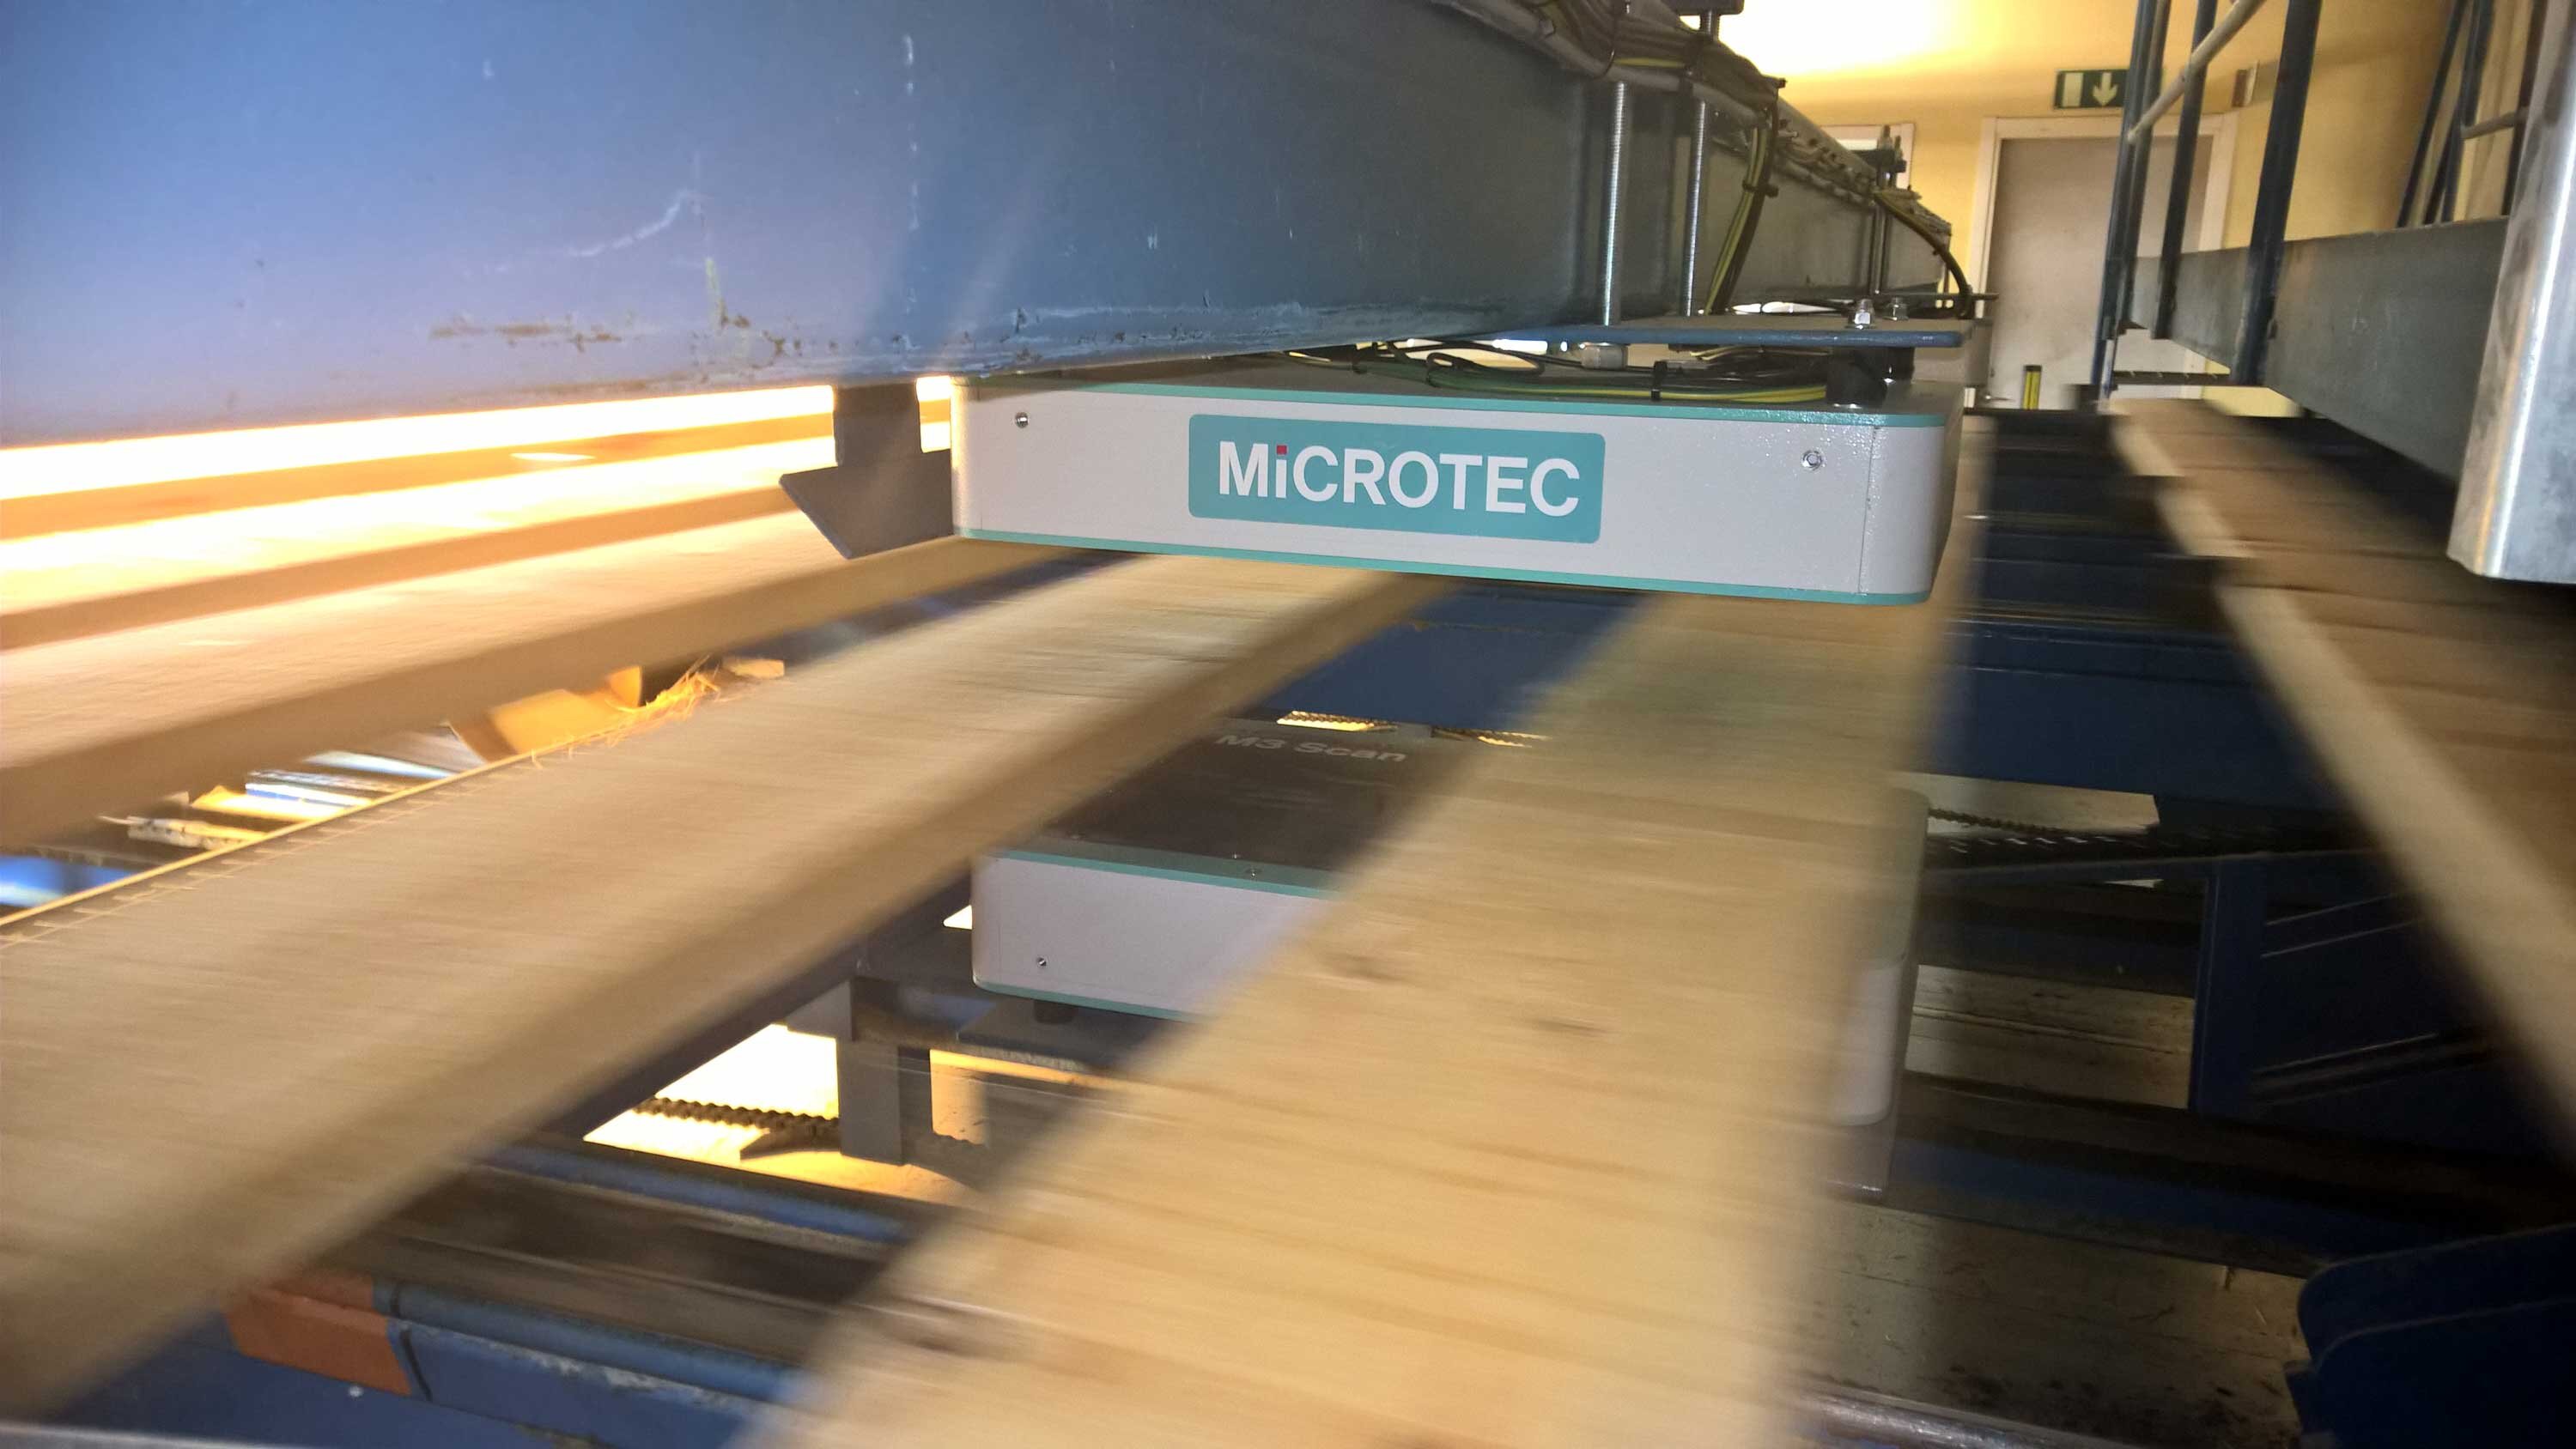 Norra Timber measures wood moisture according to EU standards